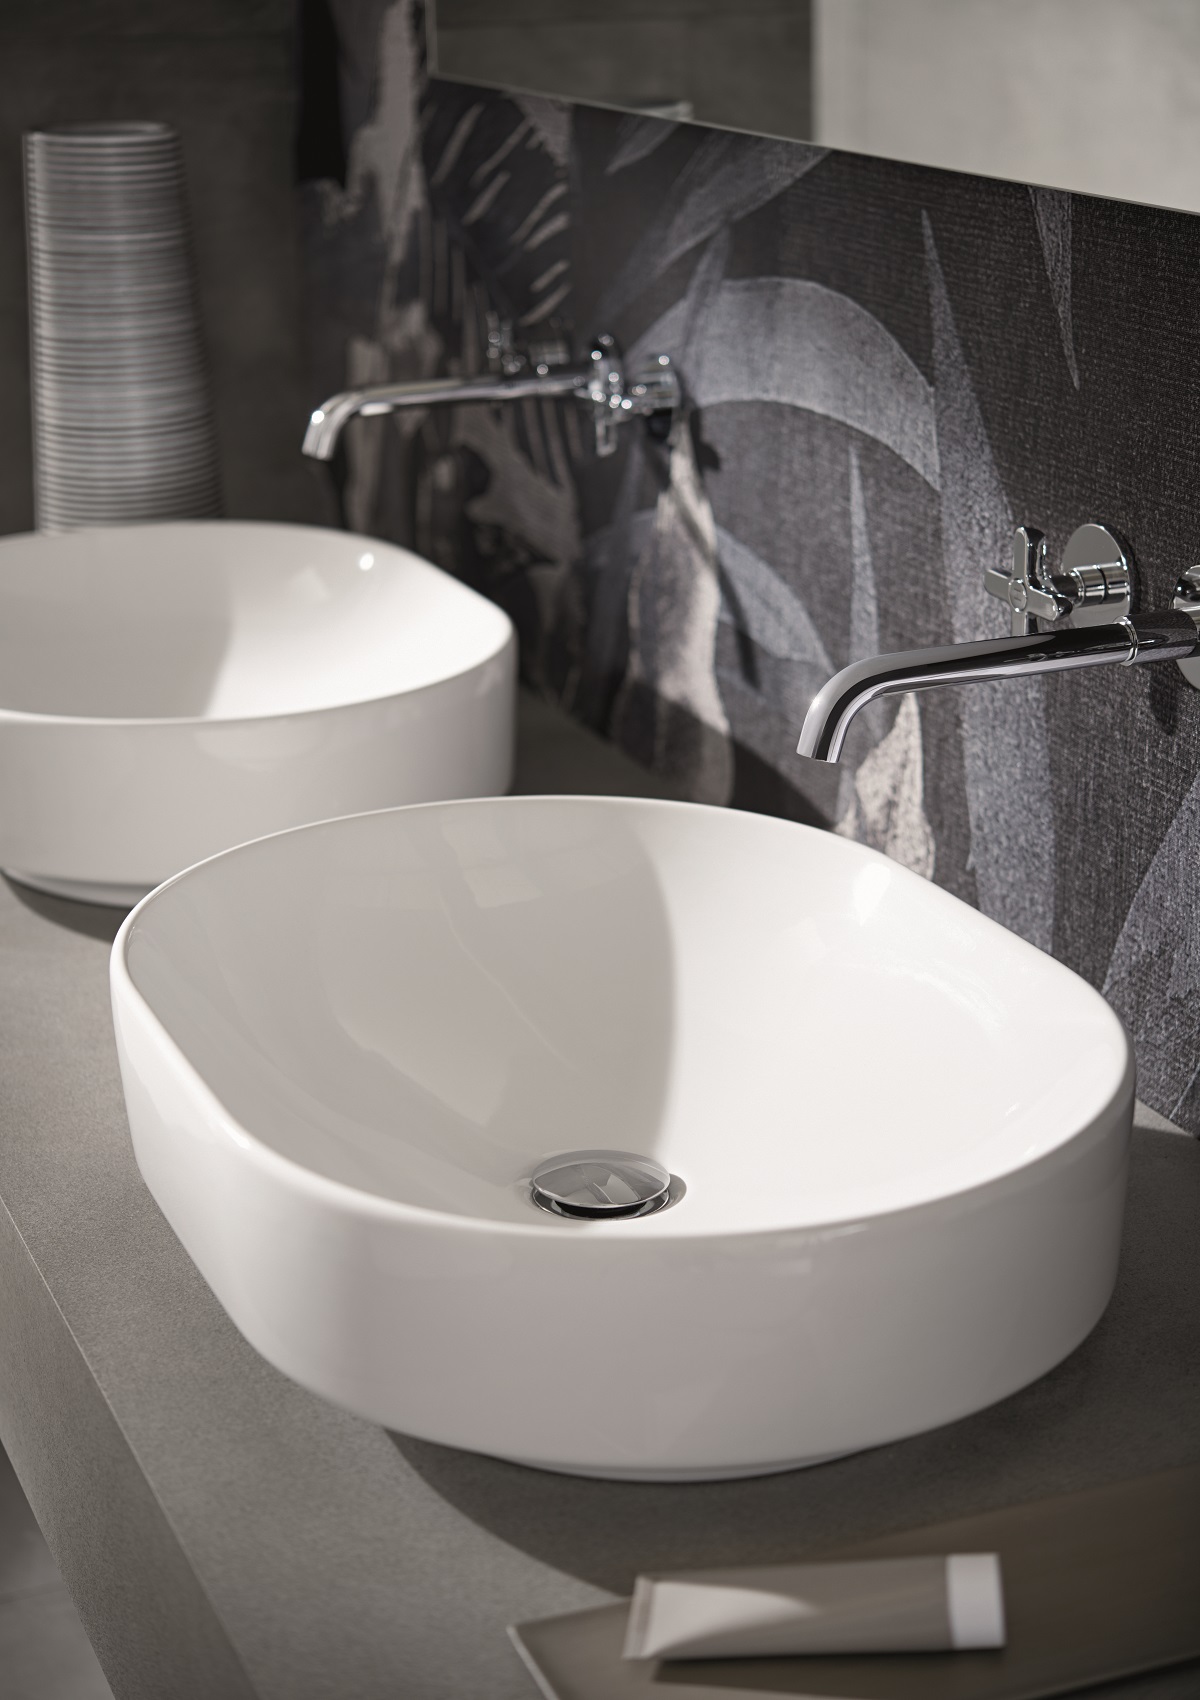 VariForm washbasin by Geberit introduces touchless technology to the bathroom